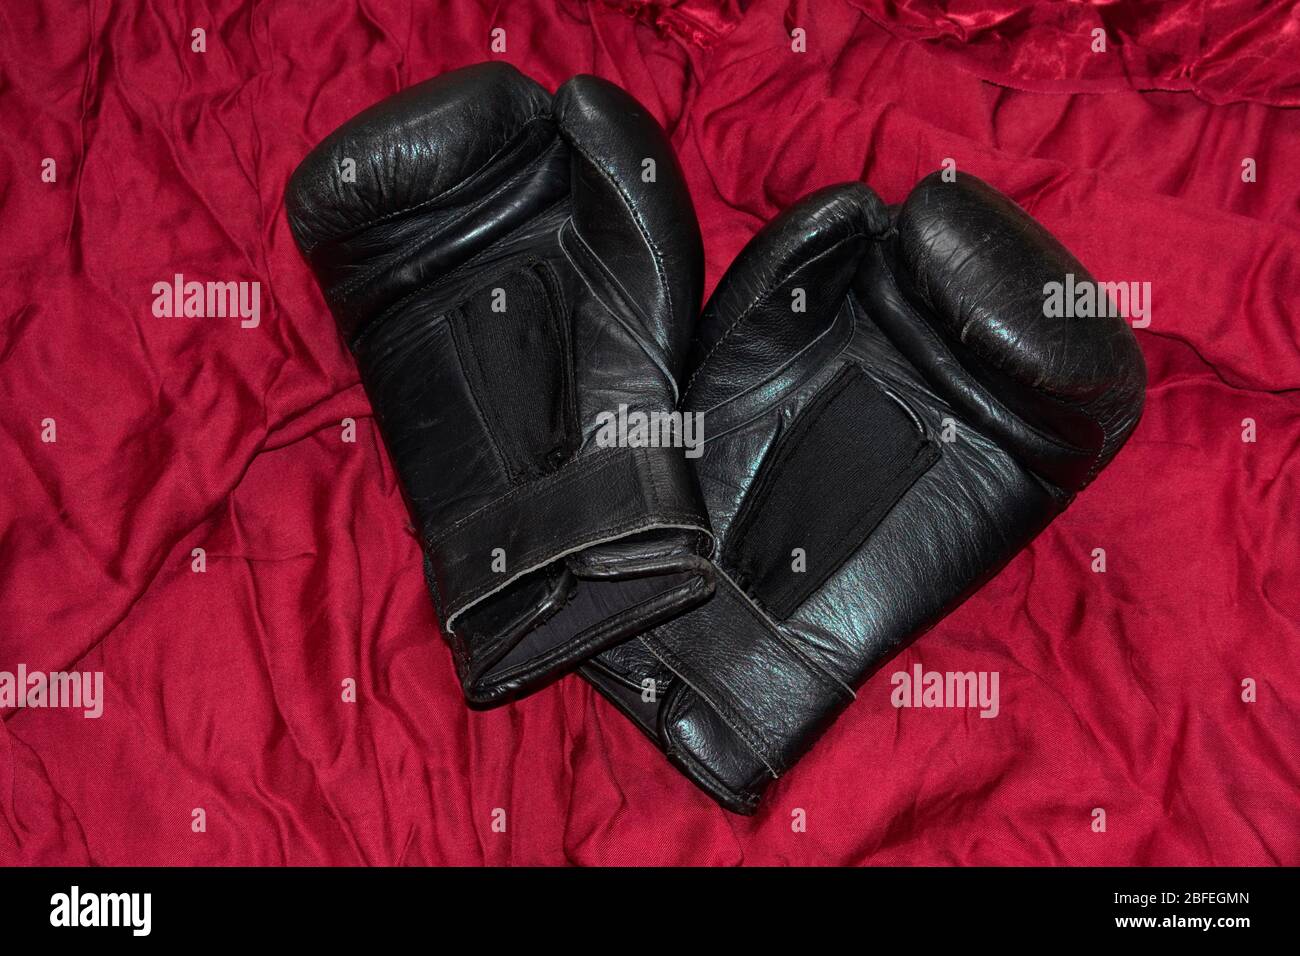 A pair of black leather boxing gloves i lying on red satin. Stock Photo